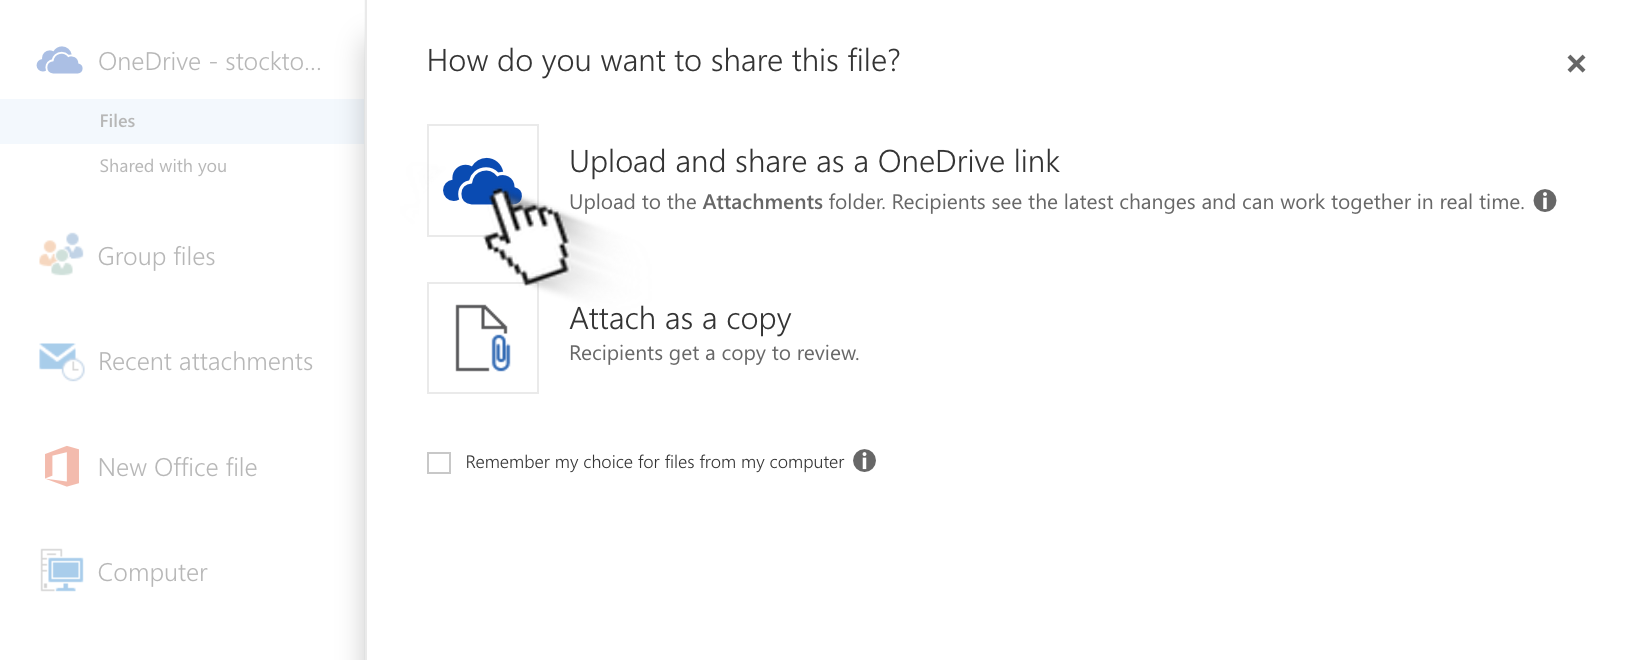 screenshot displaying the upload and share as a onedrive link option